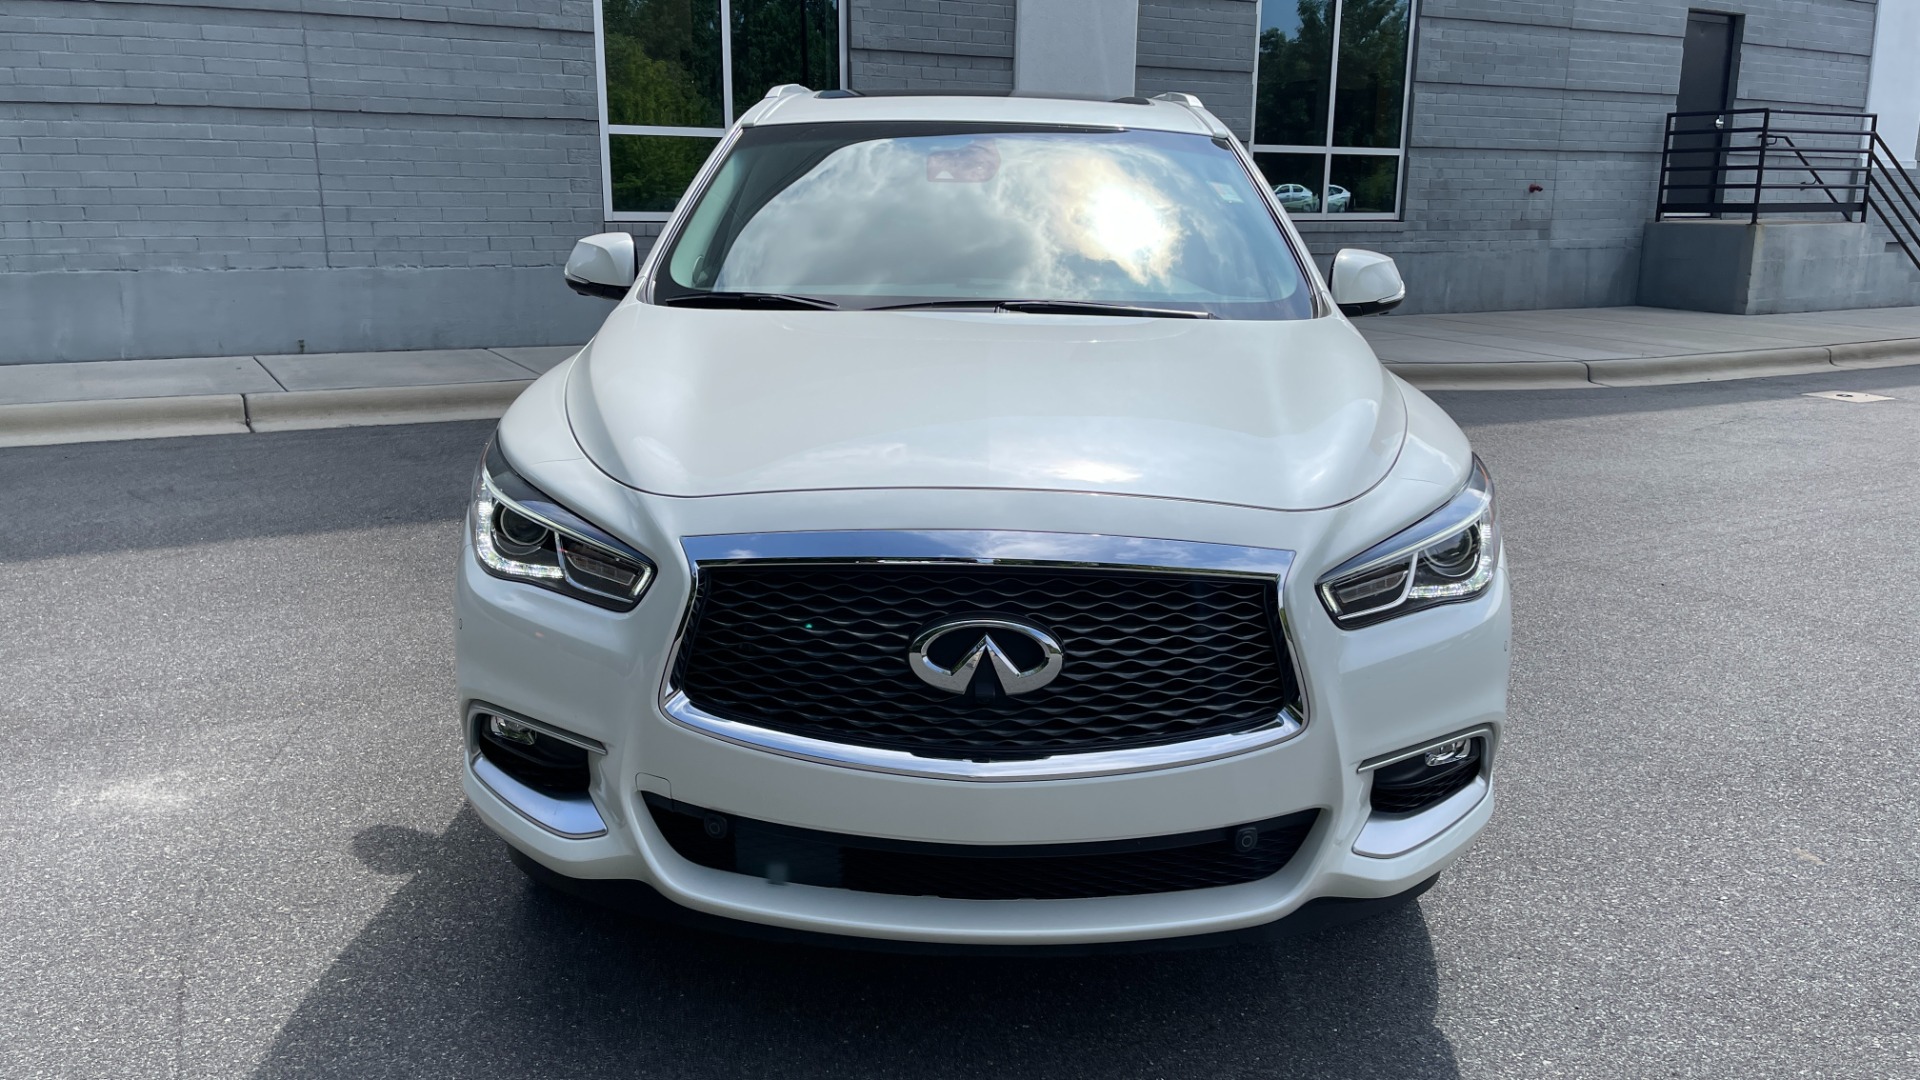 Used 2016 INFINITI QX60 AWD / DVD / 3RD ROW SEATS / DELUXE TECH for sale $27,999 at Formula Imports in Charlotte NC 28227 6